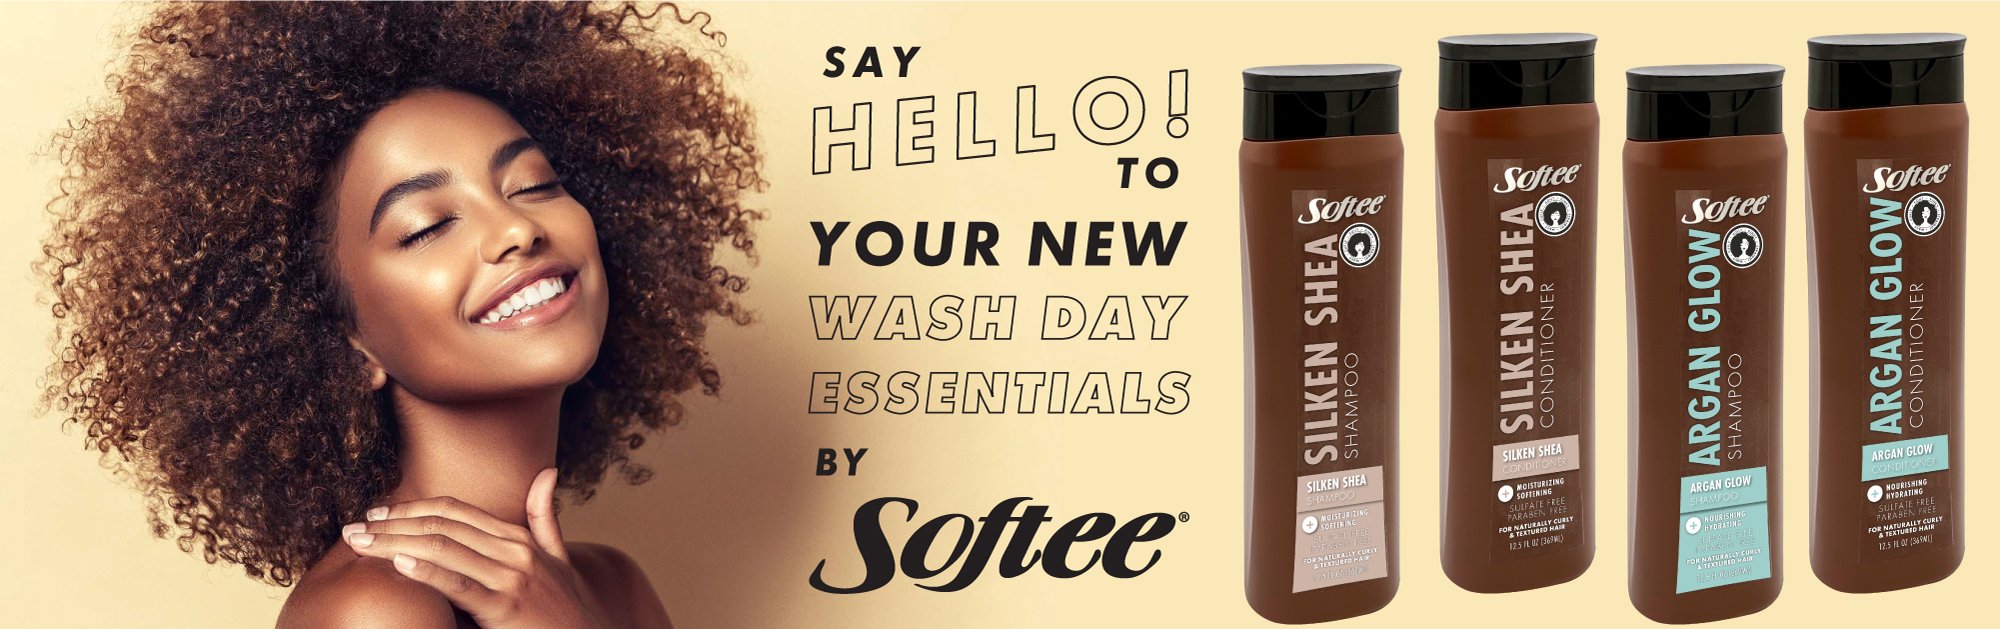 Softee Products